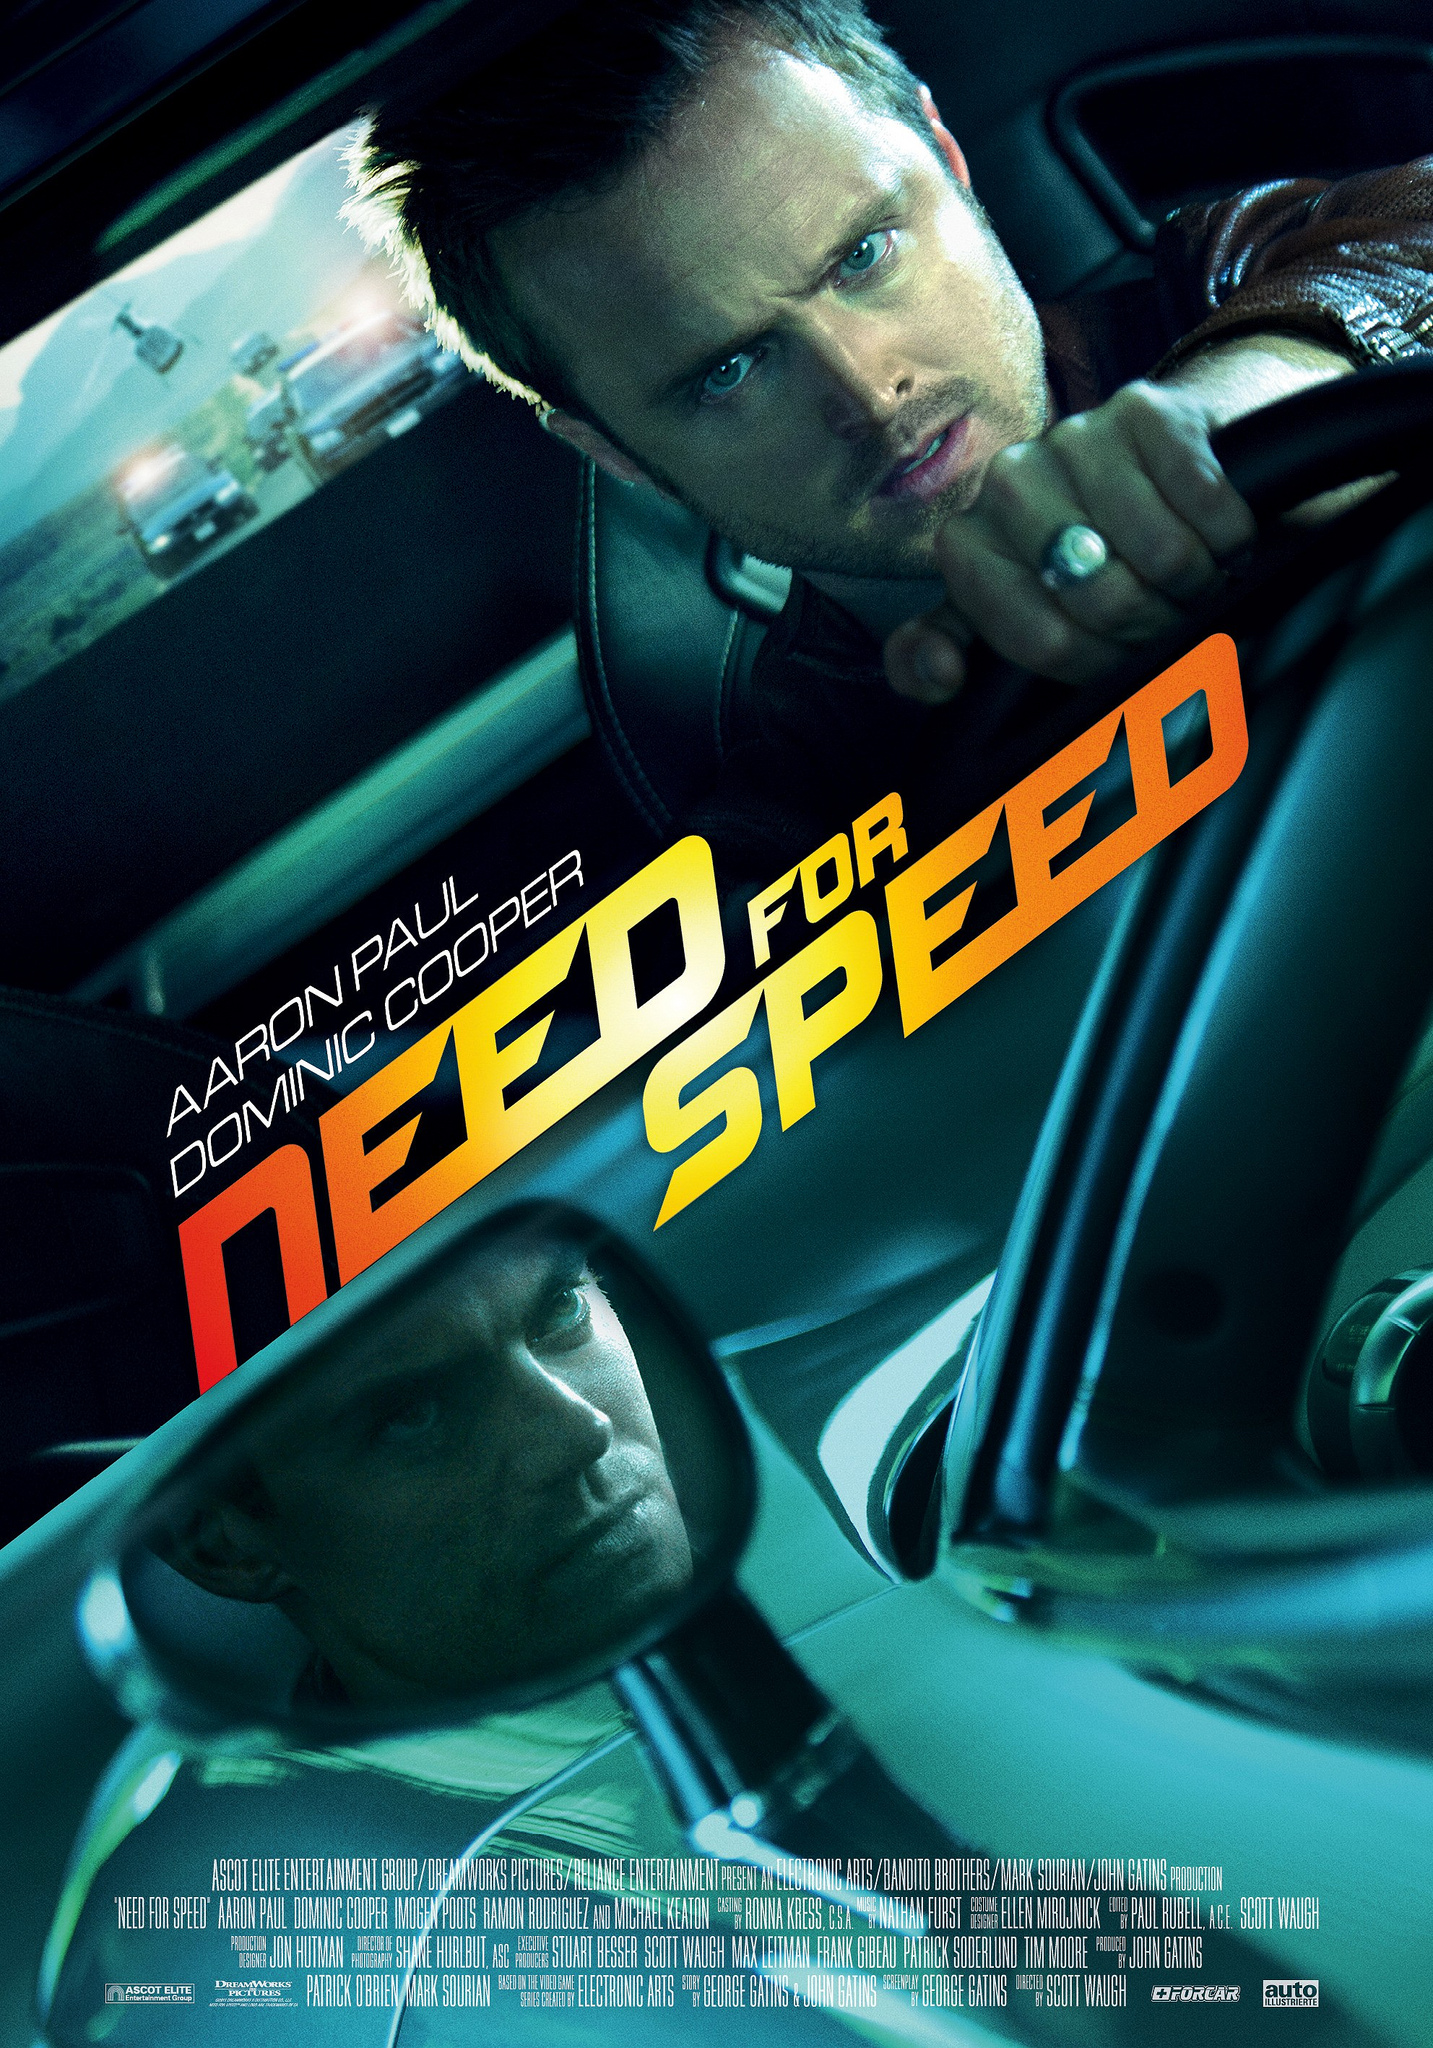 Need for Speed 2014, directed by Scott Waugh